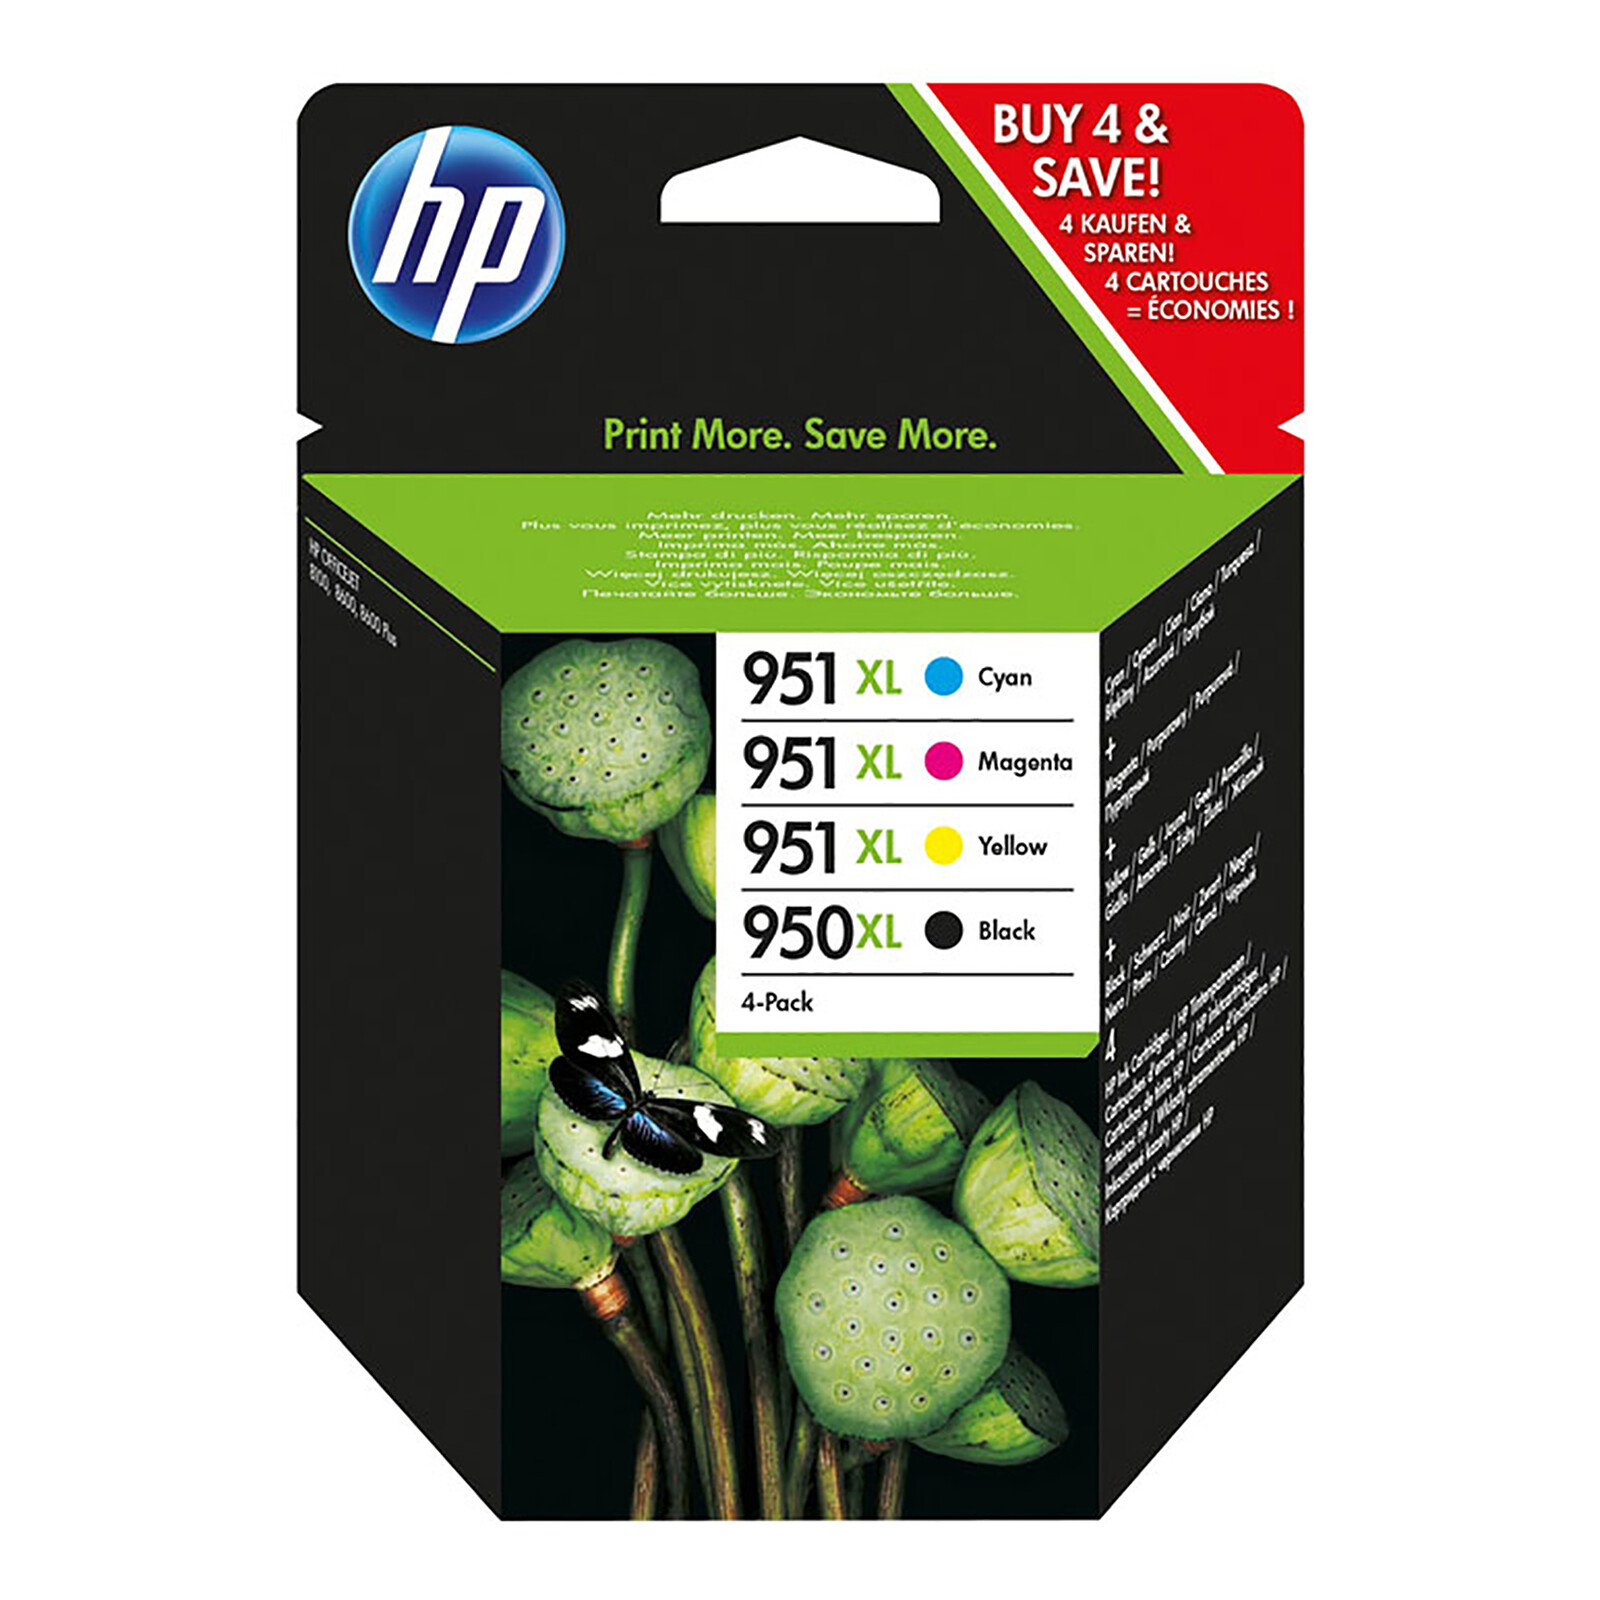 Cartouches d'encre - Pack cartouches HP 934XL et HP 935XL rechargées -  Consommables HP CANON BROTHER